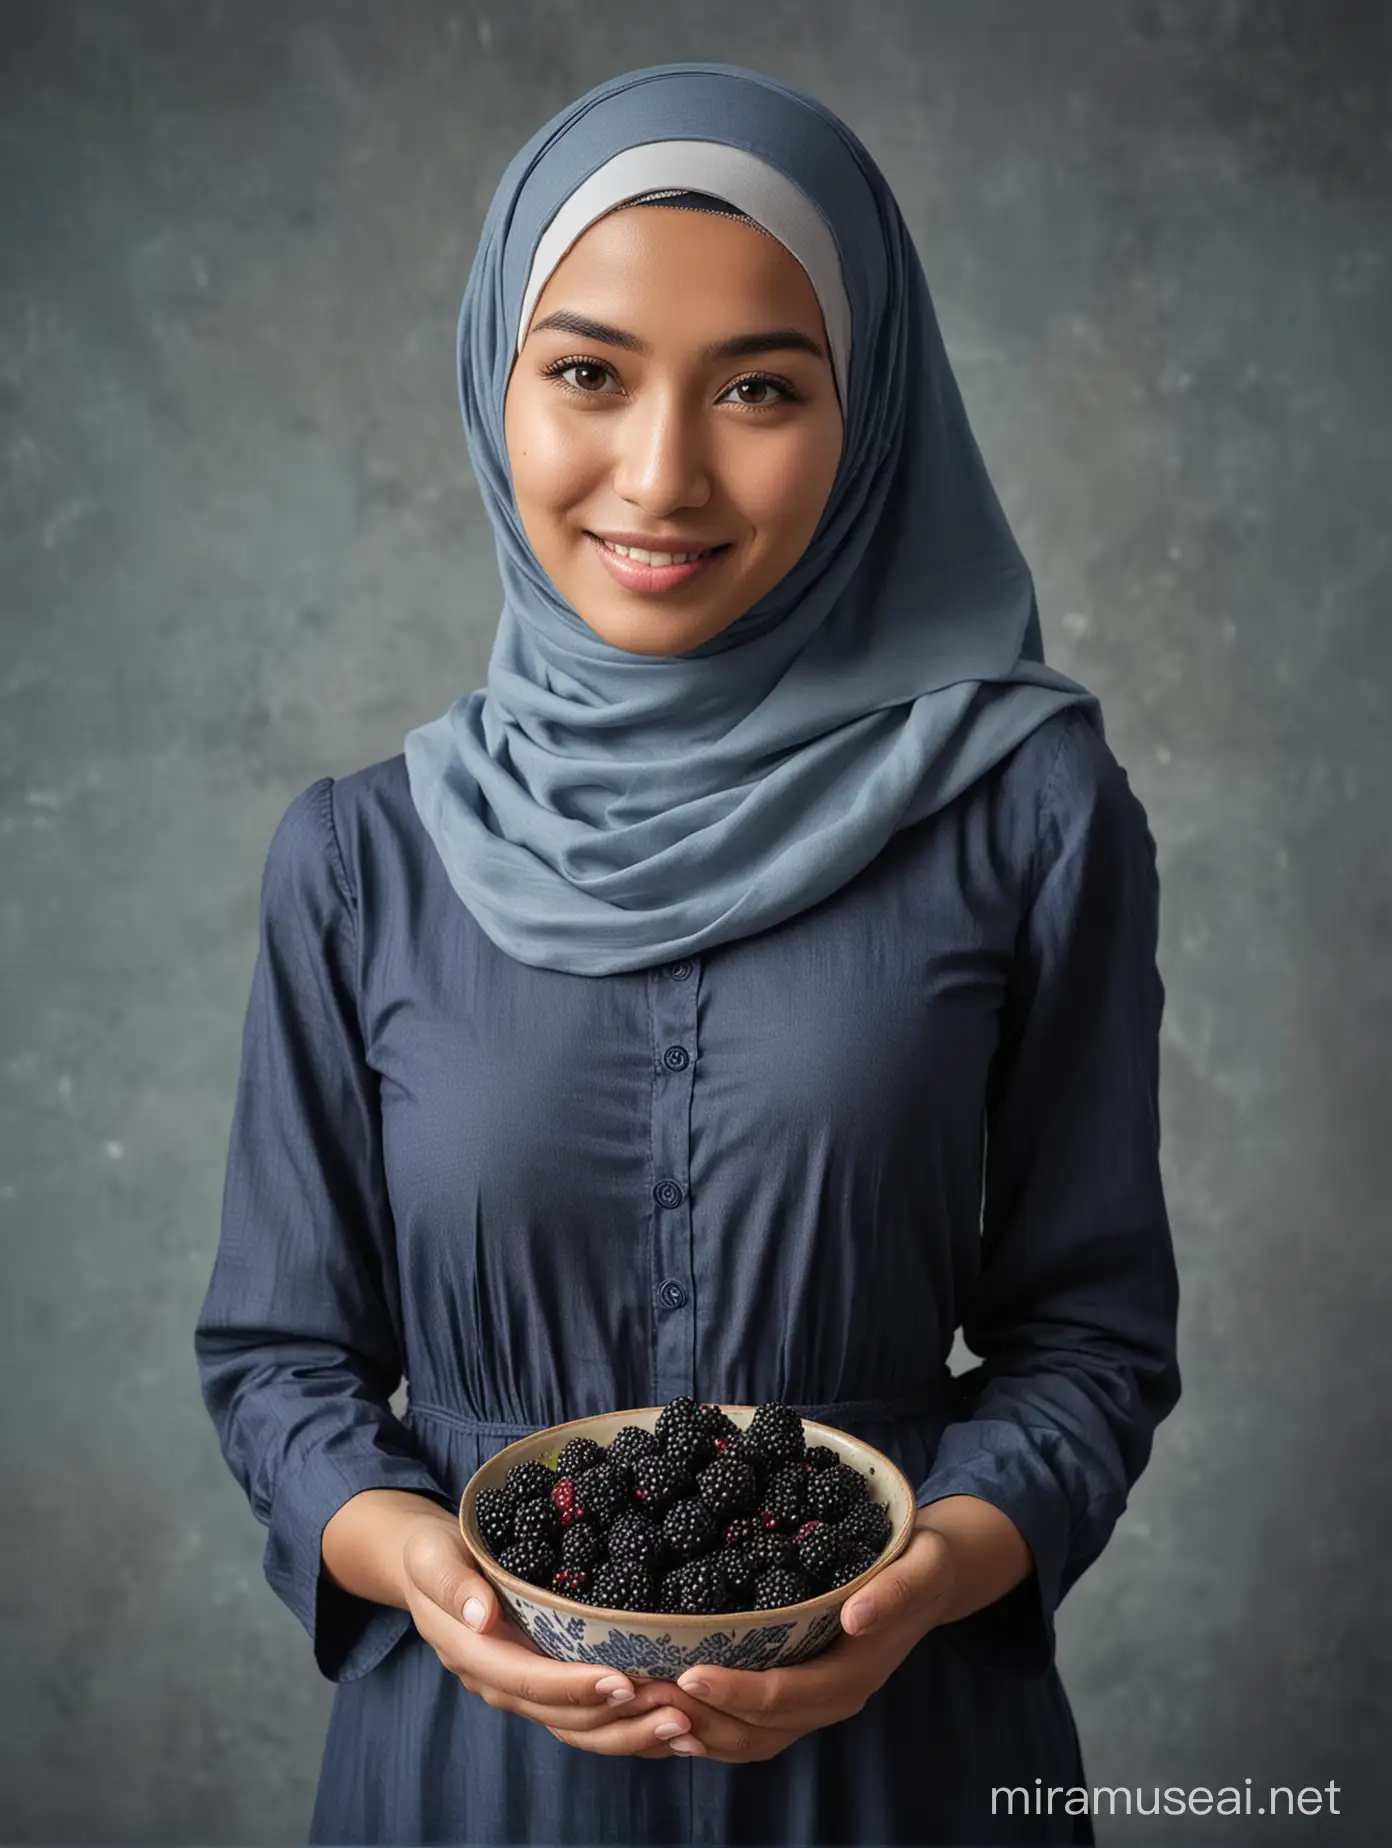 Indonesian Woman in Blue Hijab Holding Bowl of Blackberries